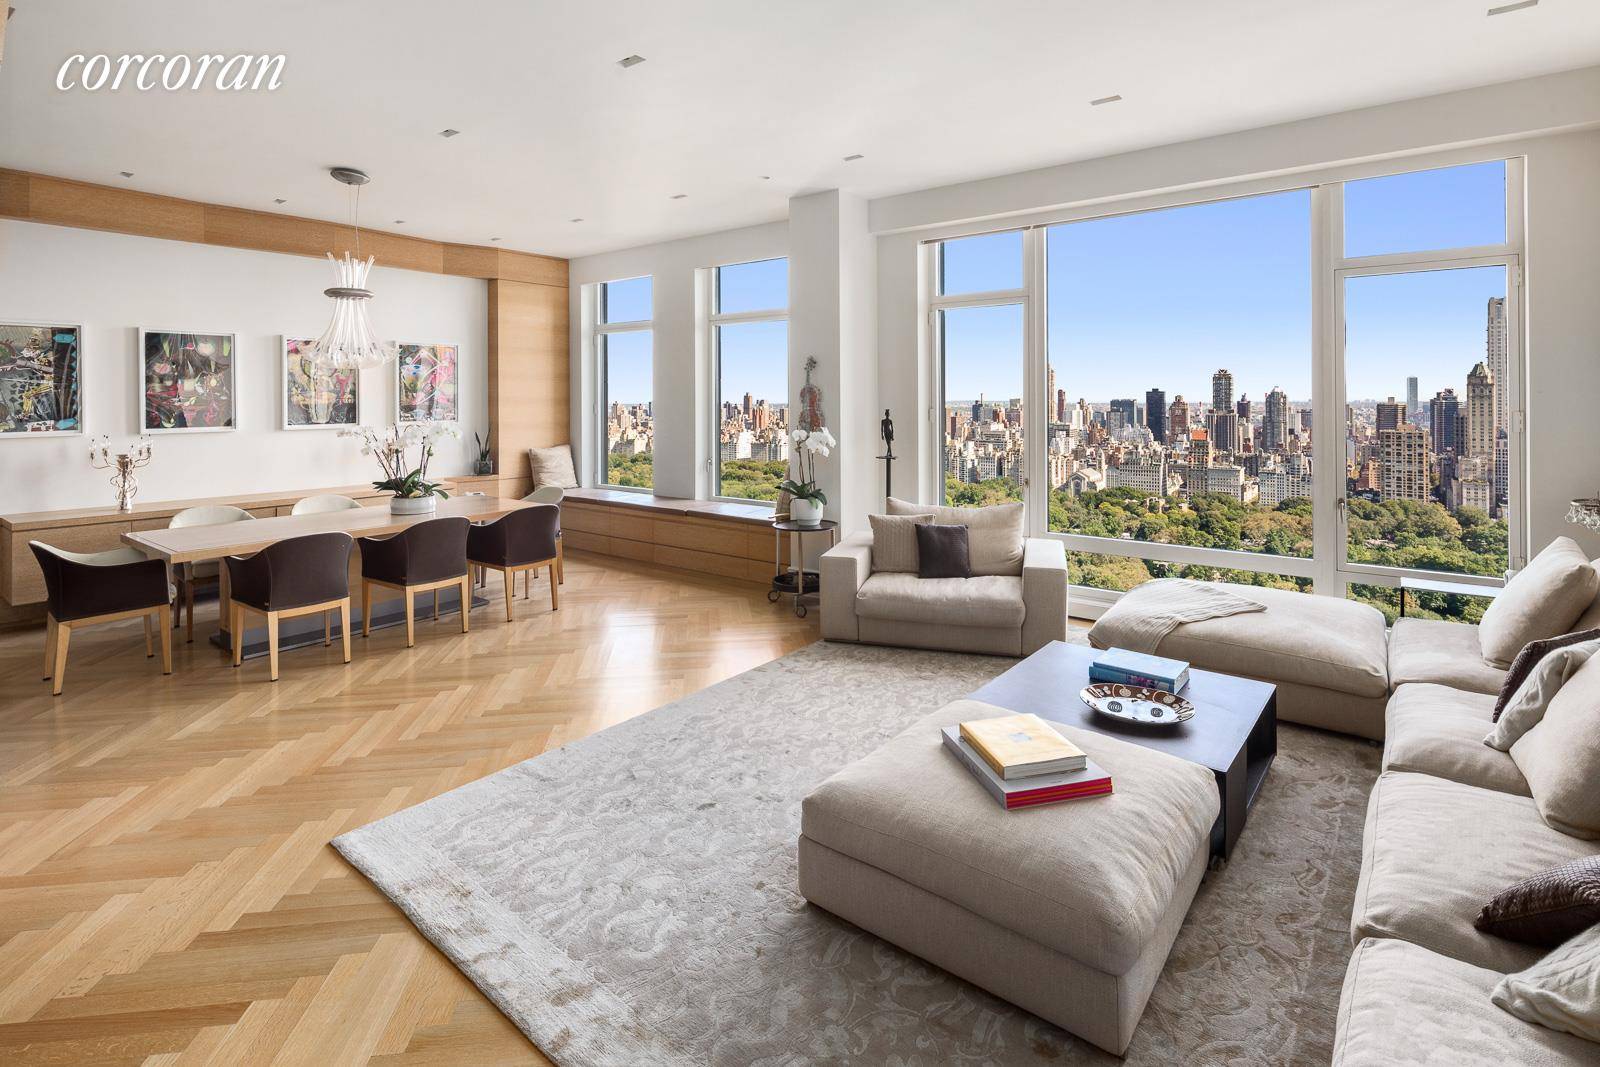 Welcome to 36B, a 2, 367 SF residence in the premier 15 Central Park West featuring unobstructed views of Central Park and beyond.